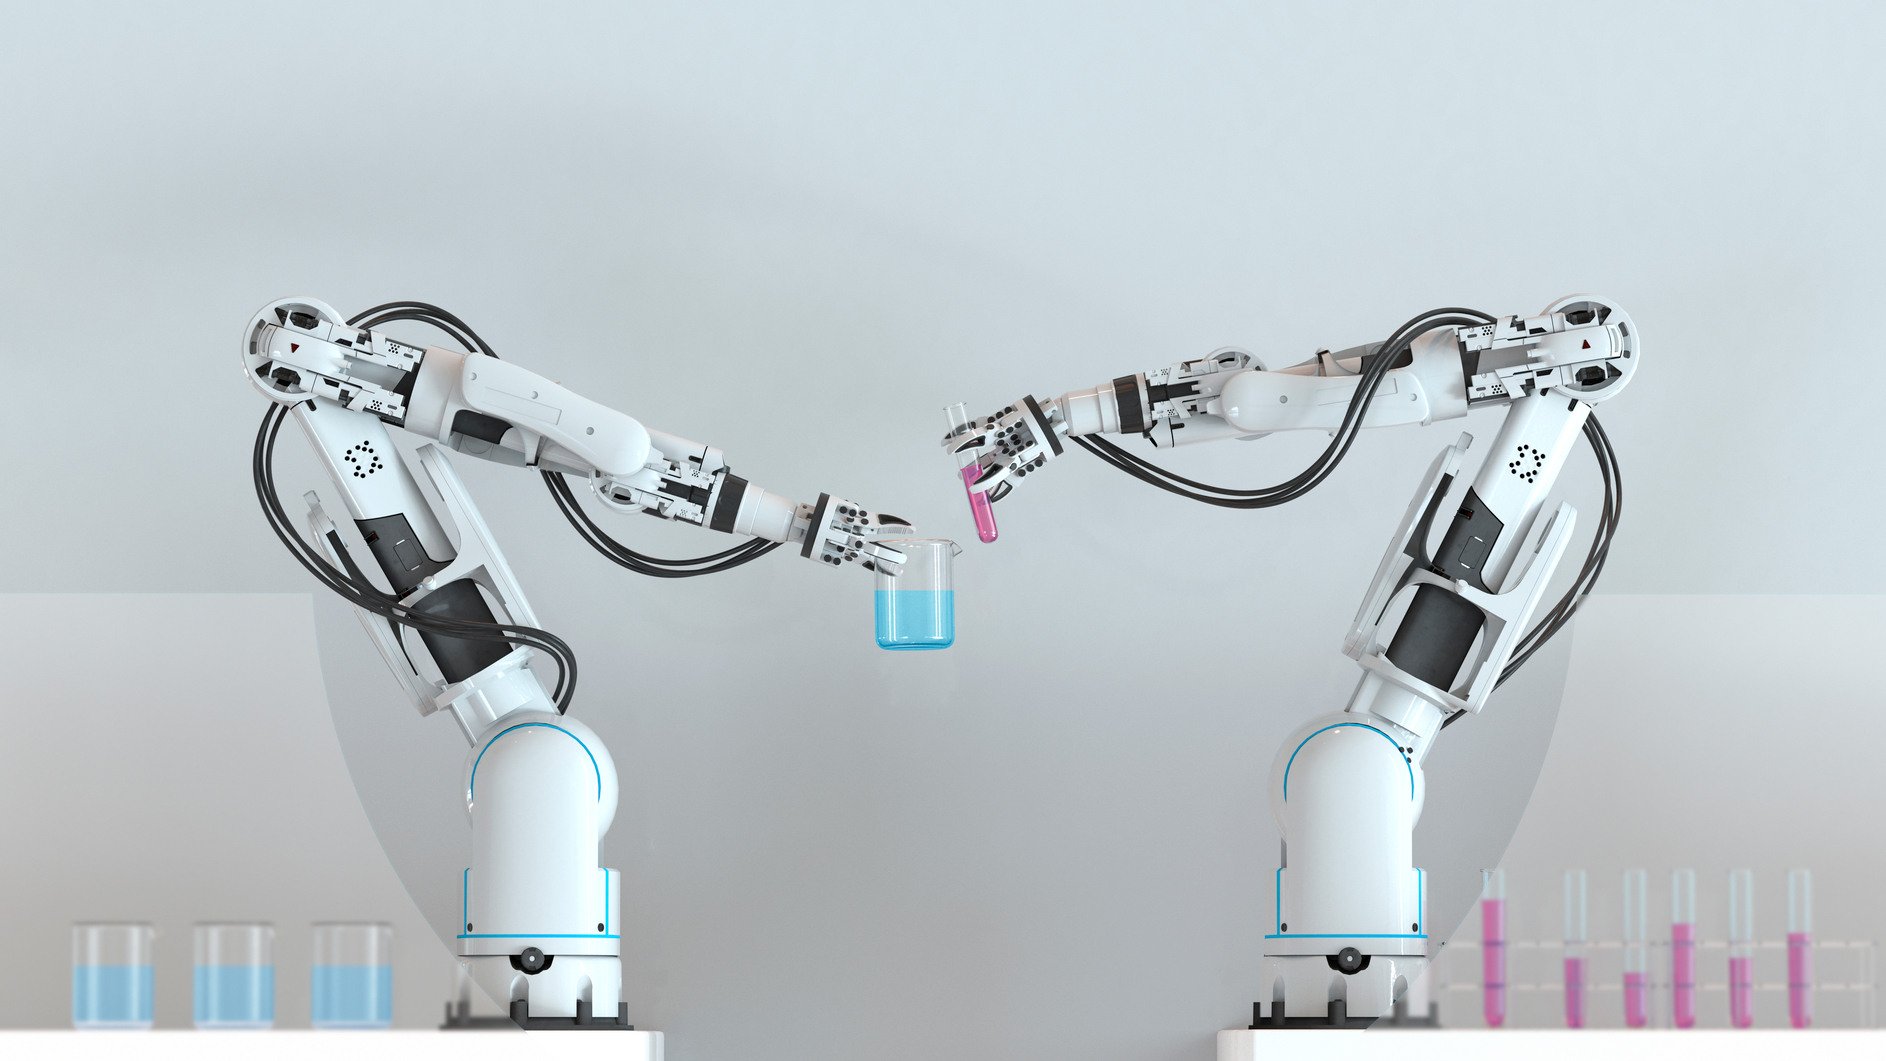 Robots performing automated medical experiments in a laboratory setting